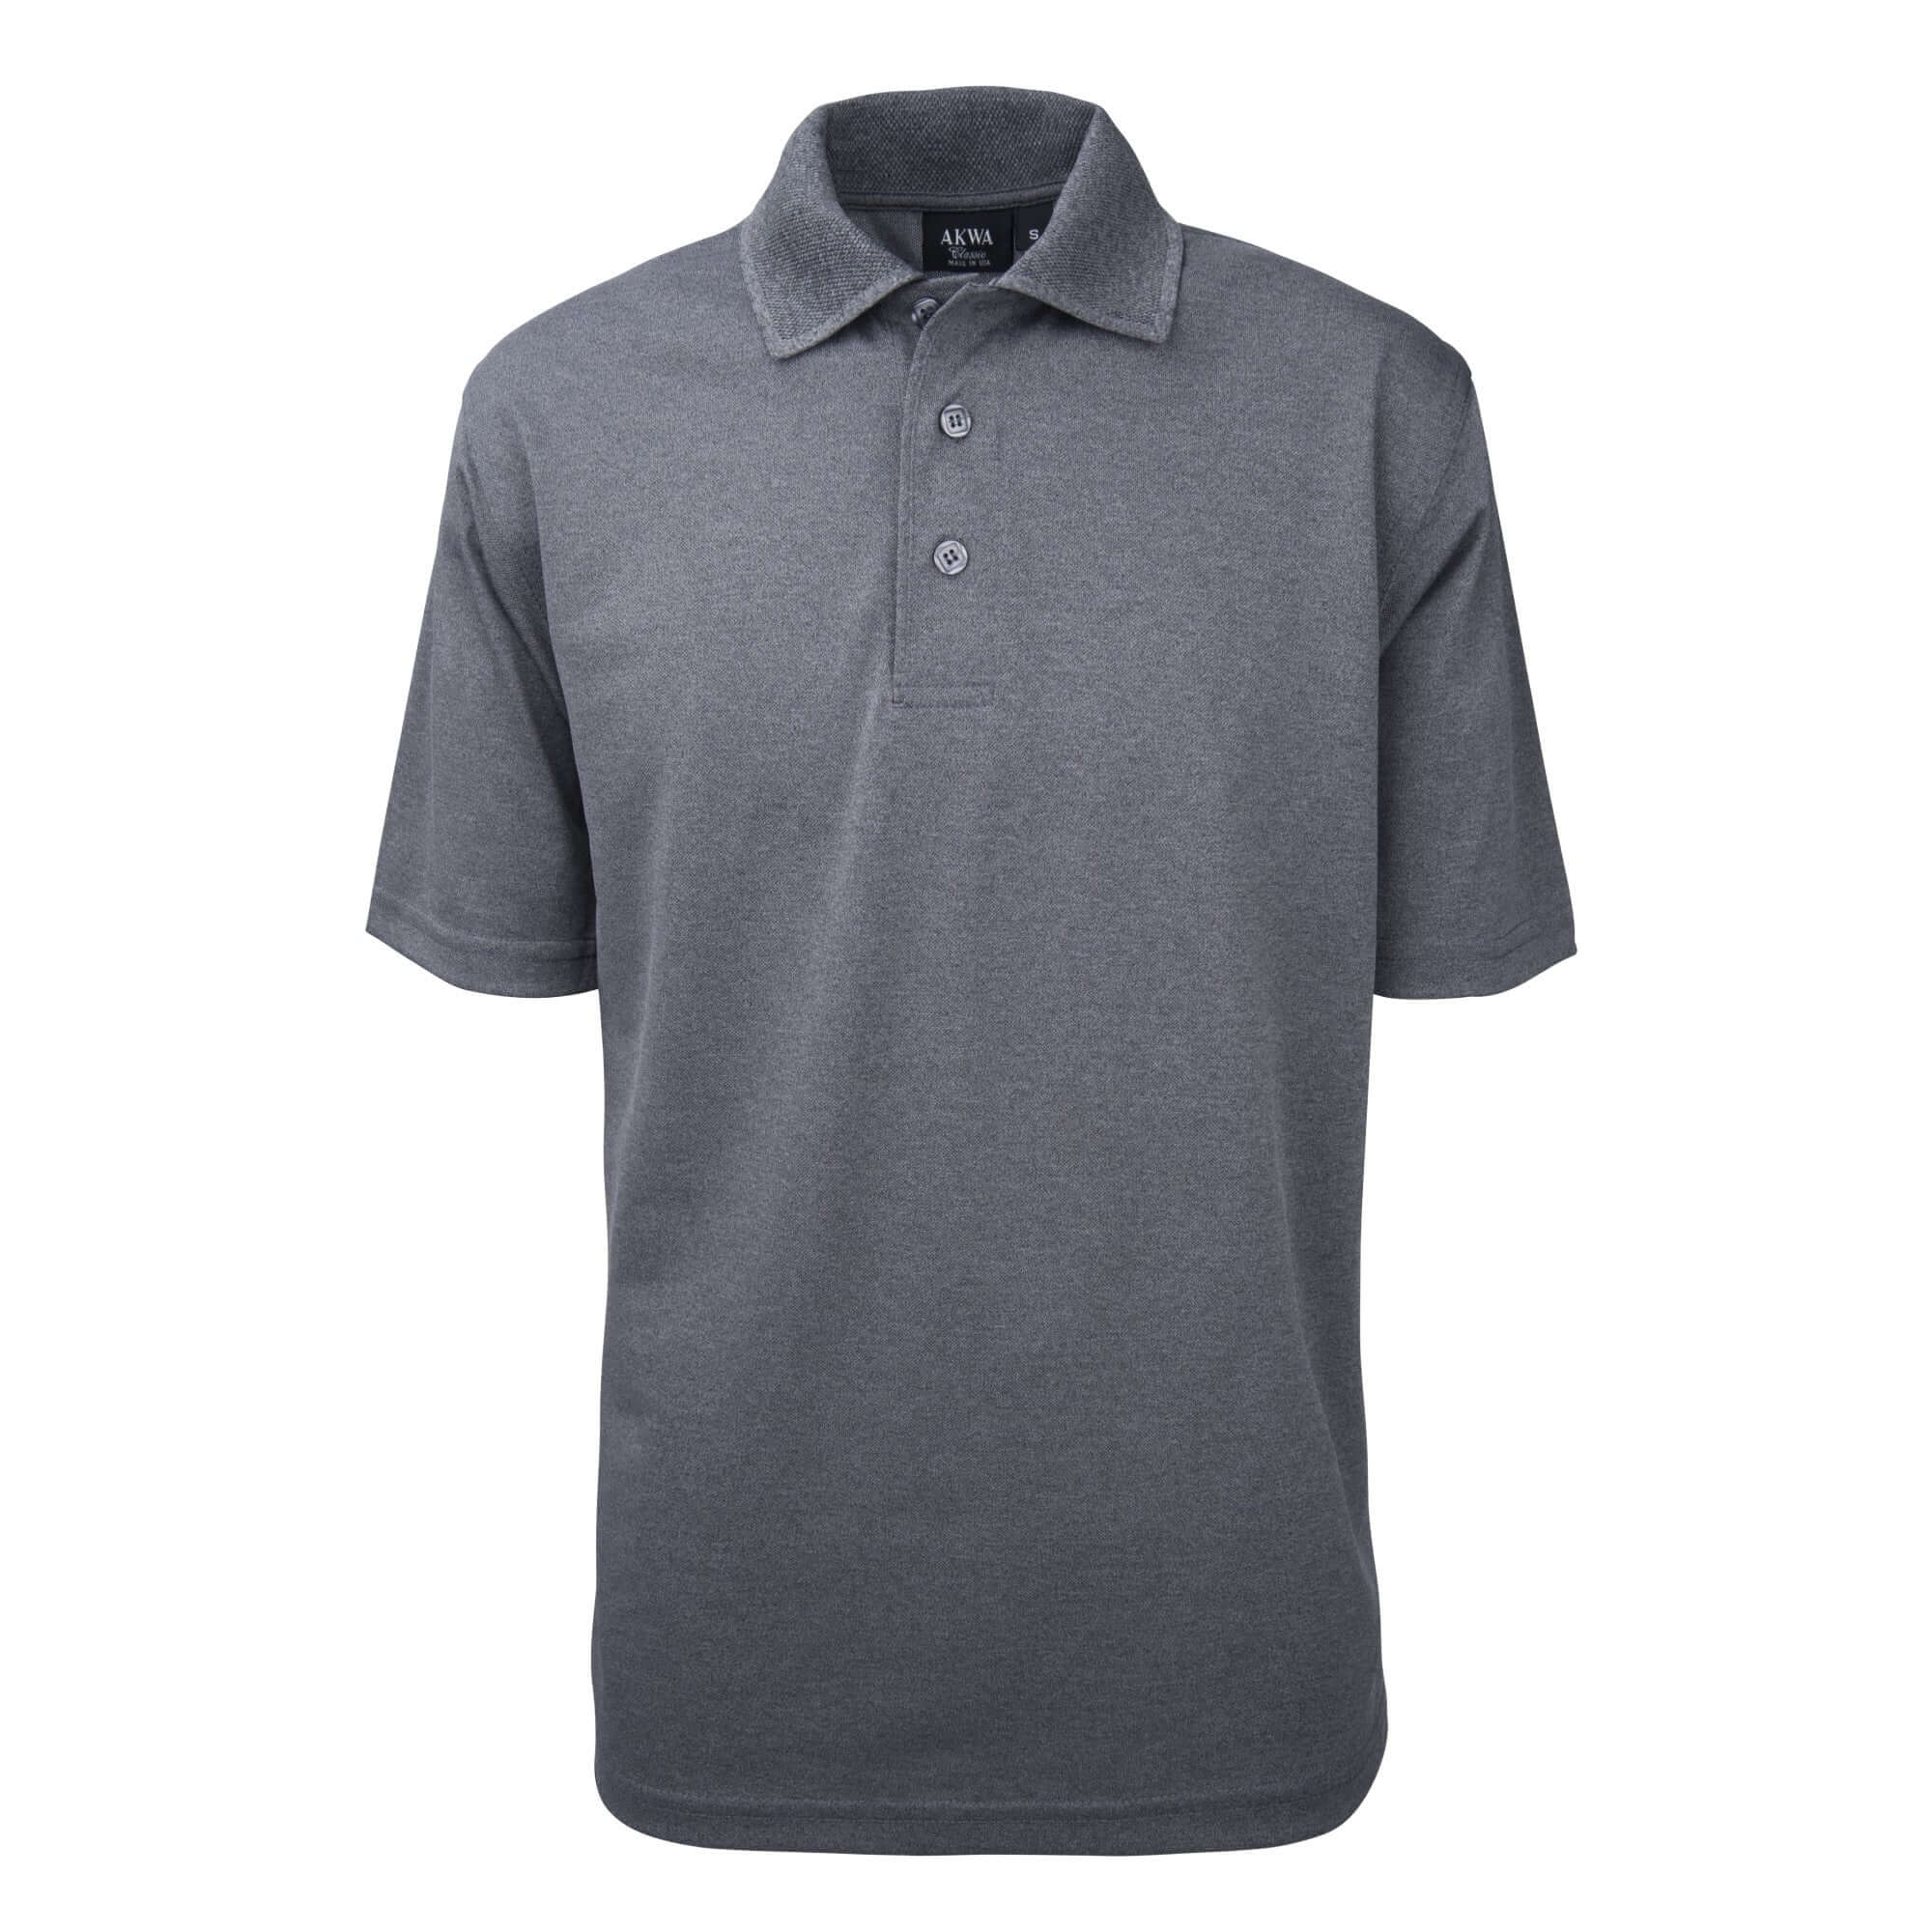 Men's Made in USA Tech Polo Shirt color_charcoal - the flag shirt